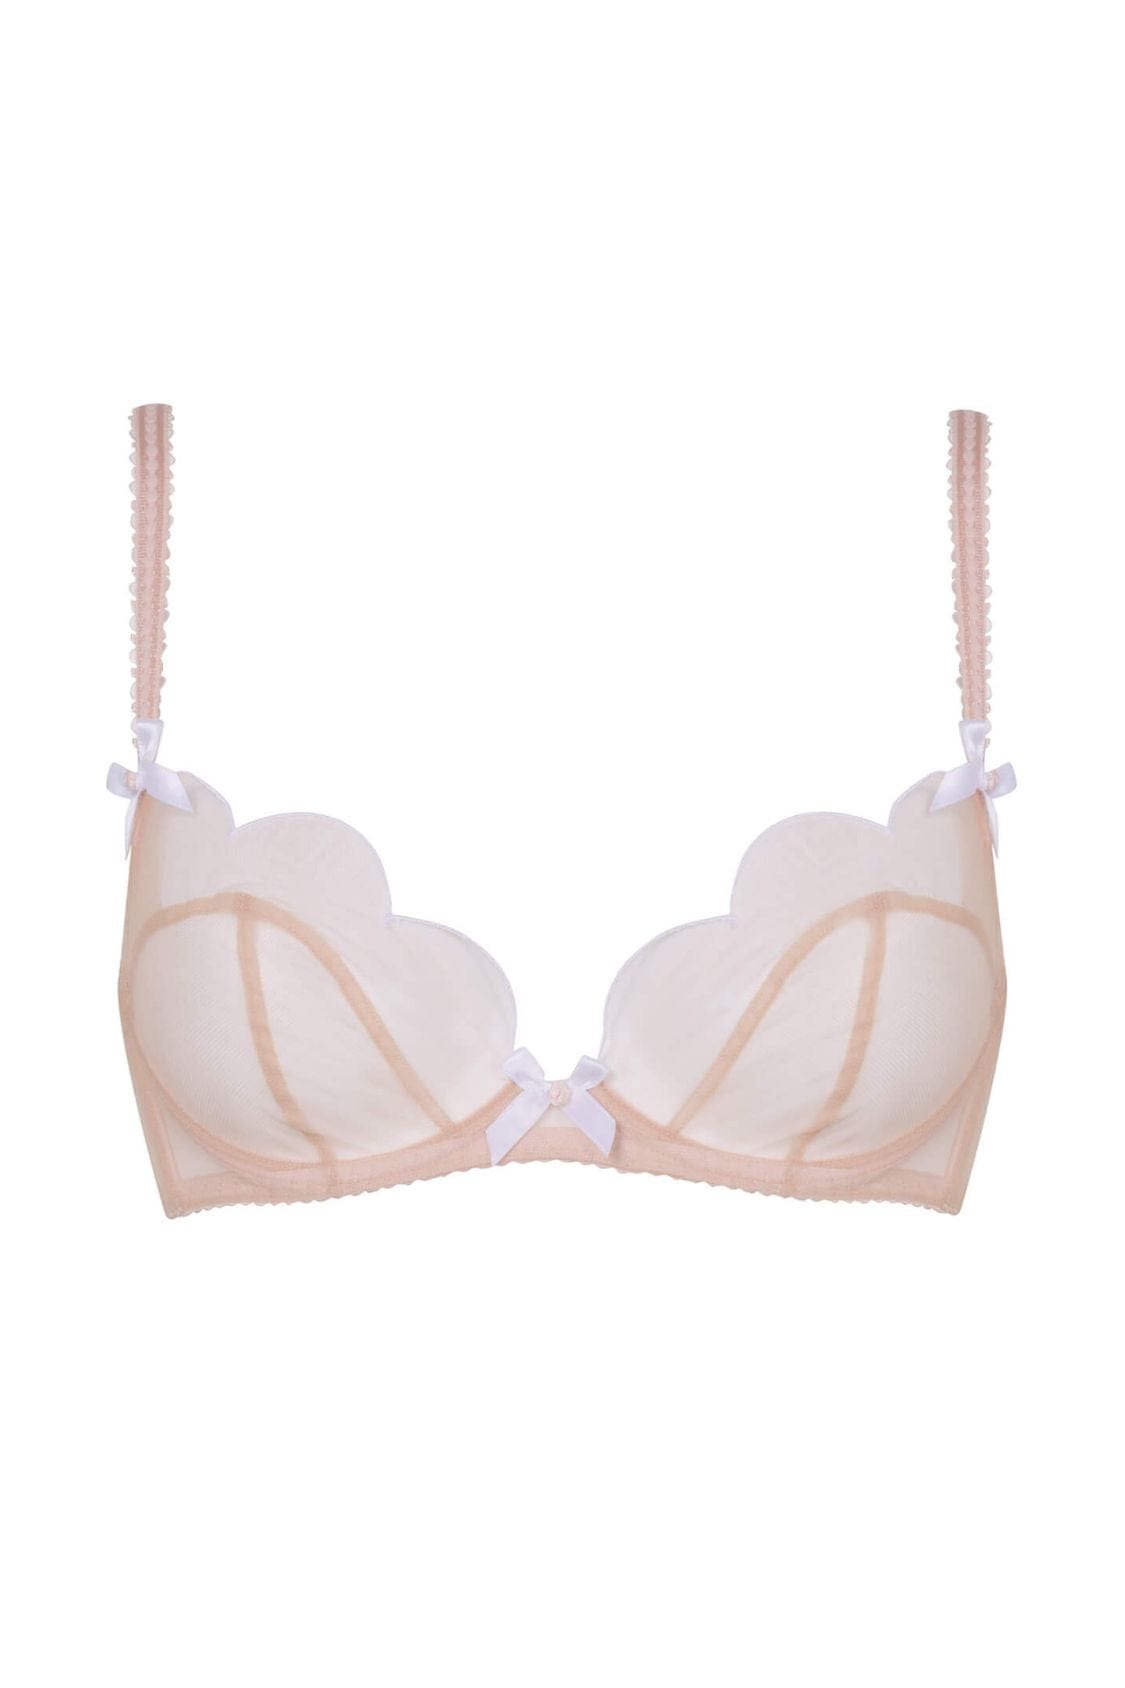 AGENT PROVOCATEUR Nude/Ivory Lindie Bra Size UK 36D BNWT (RARE &  COLLECTABLE) 4230817236330 on eBid Australia | 215960735